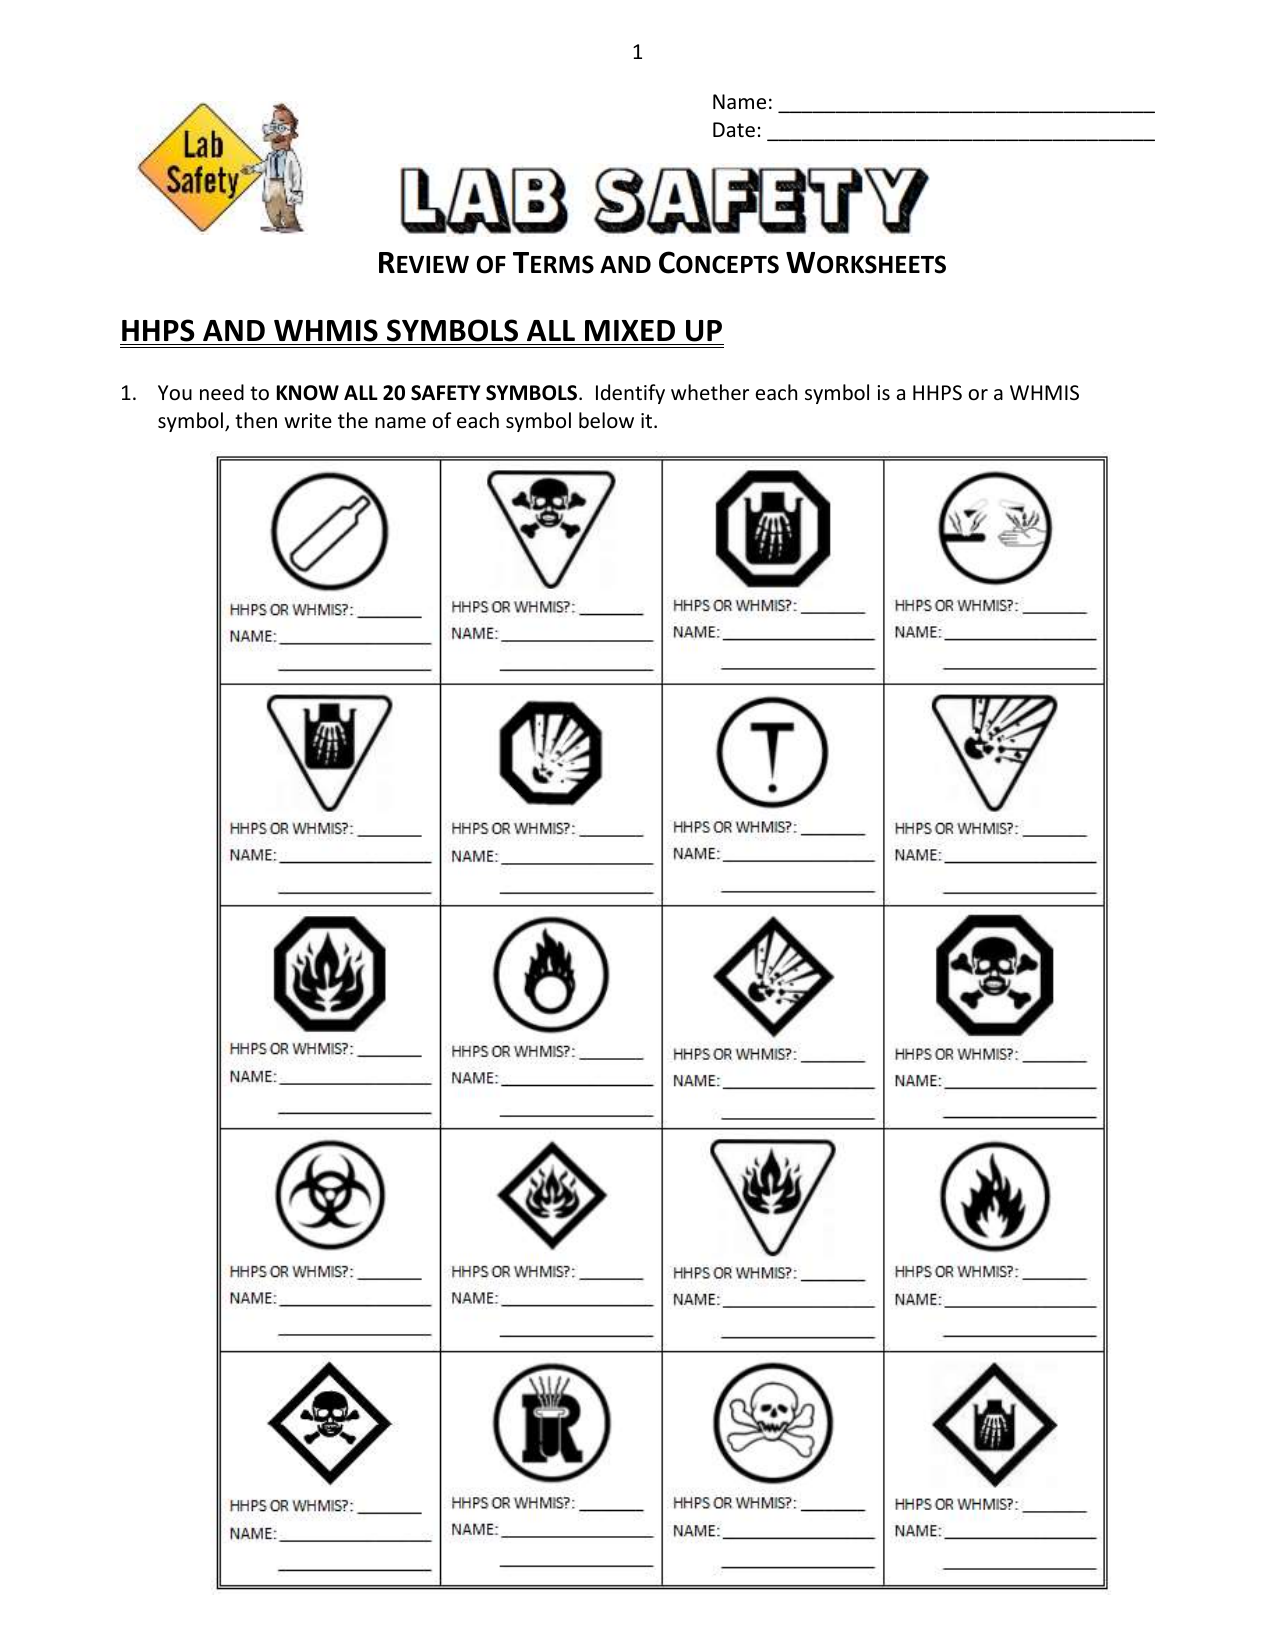 Lab Safety - Review Worksheet For Lab Safety Worksheet Answer Key